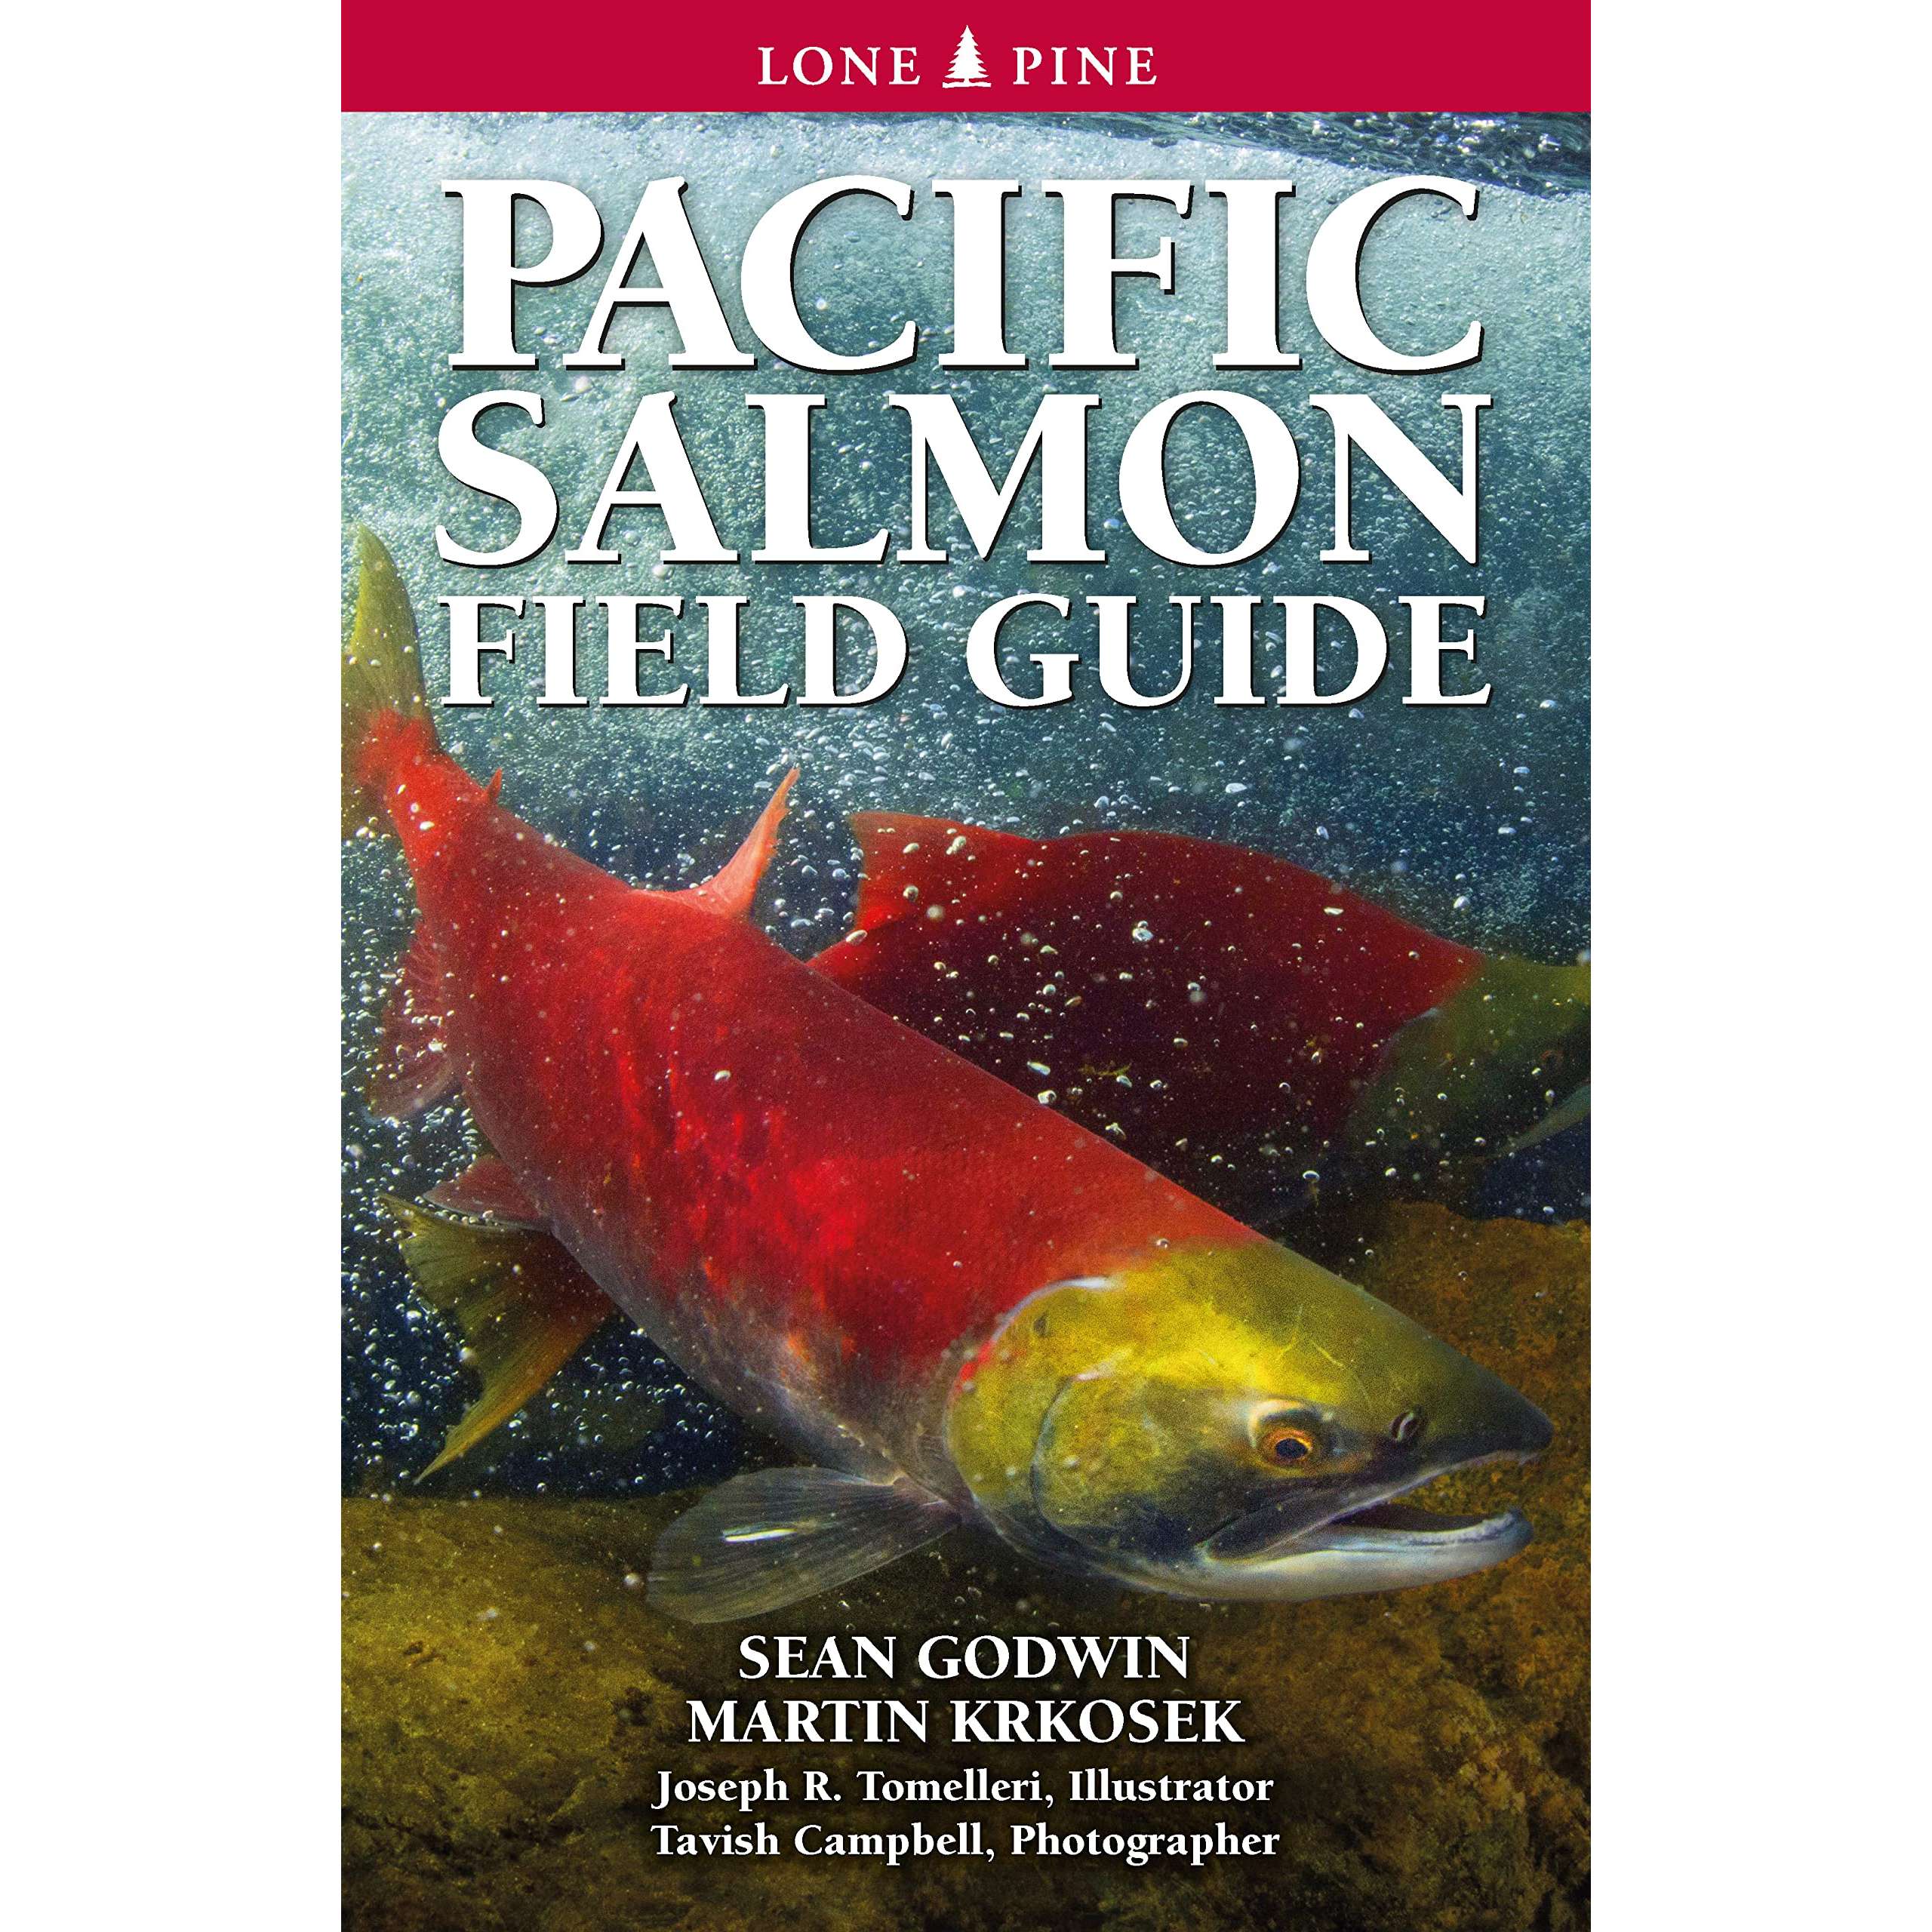 Outdoors, Camping & Travel :: All Outdoors Books :: Fish & Sealife